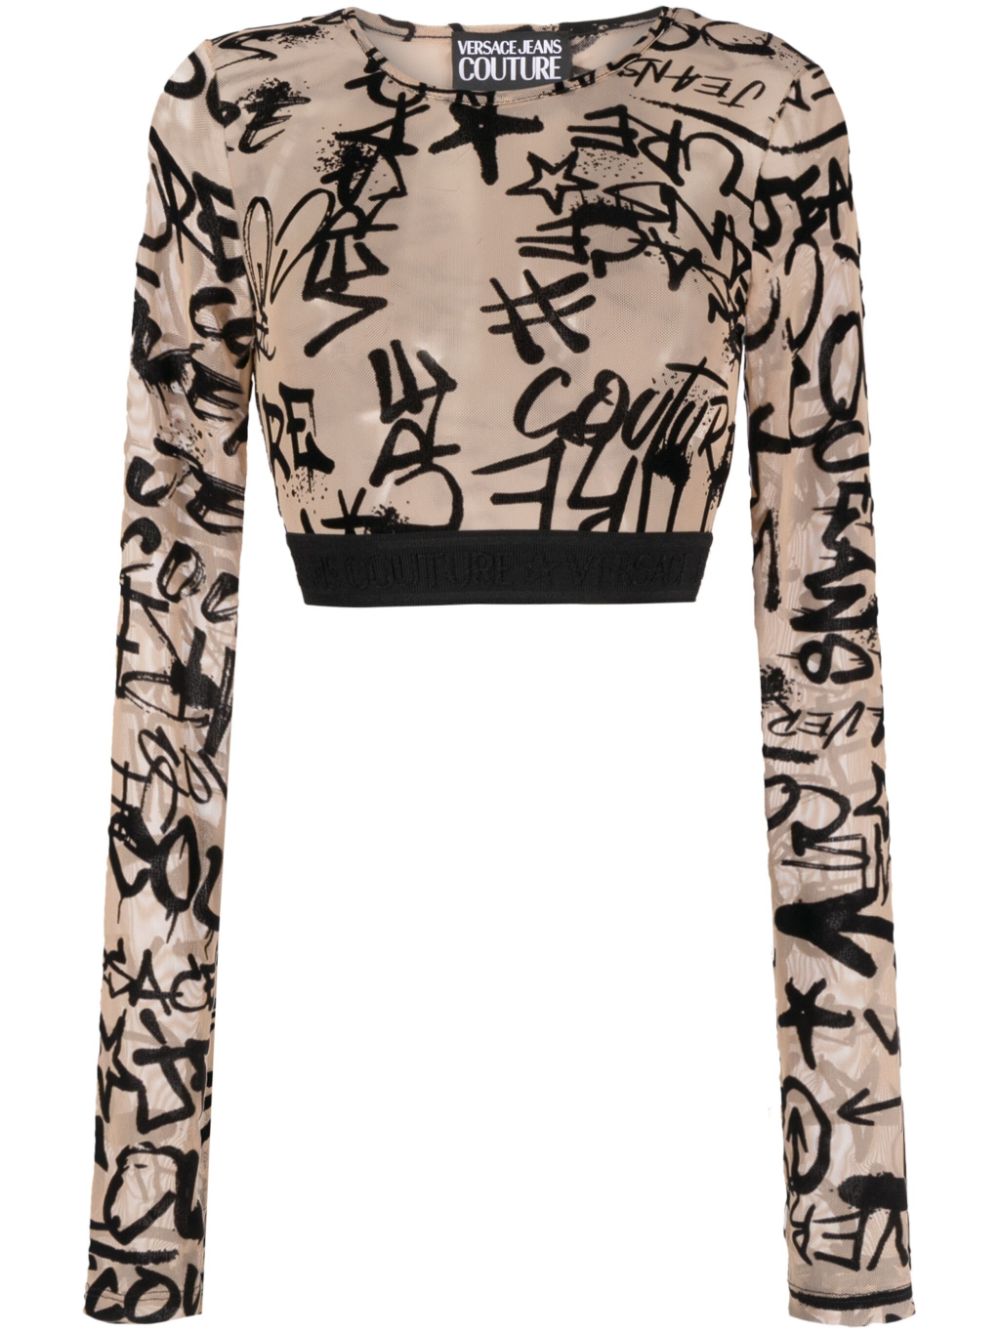 Versace Jeans Couture logo-print cropped top - Neutrals von Versace Jeans Couture